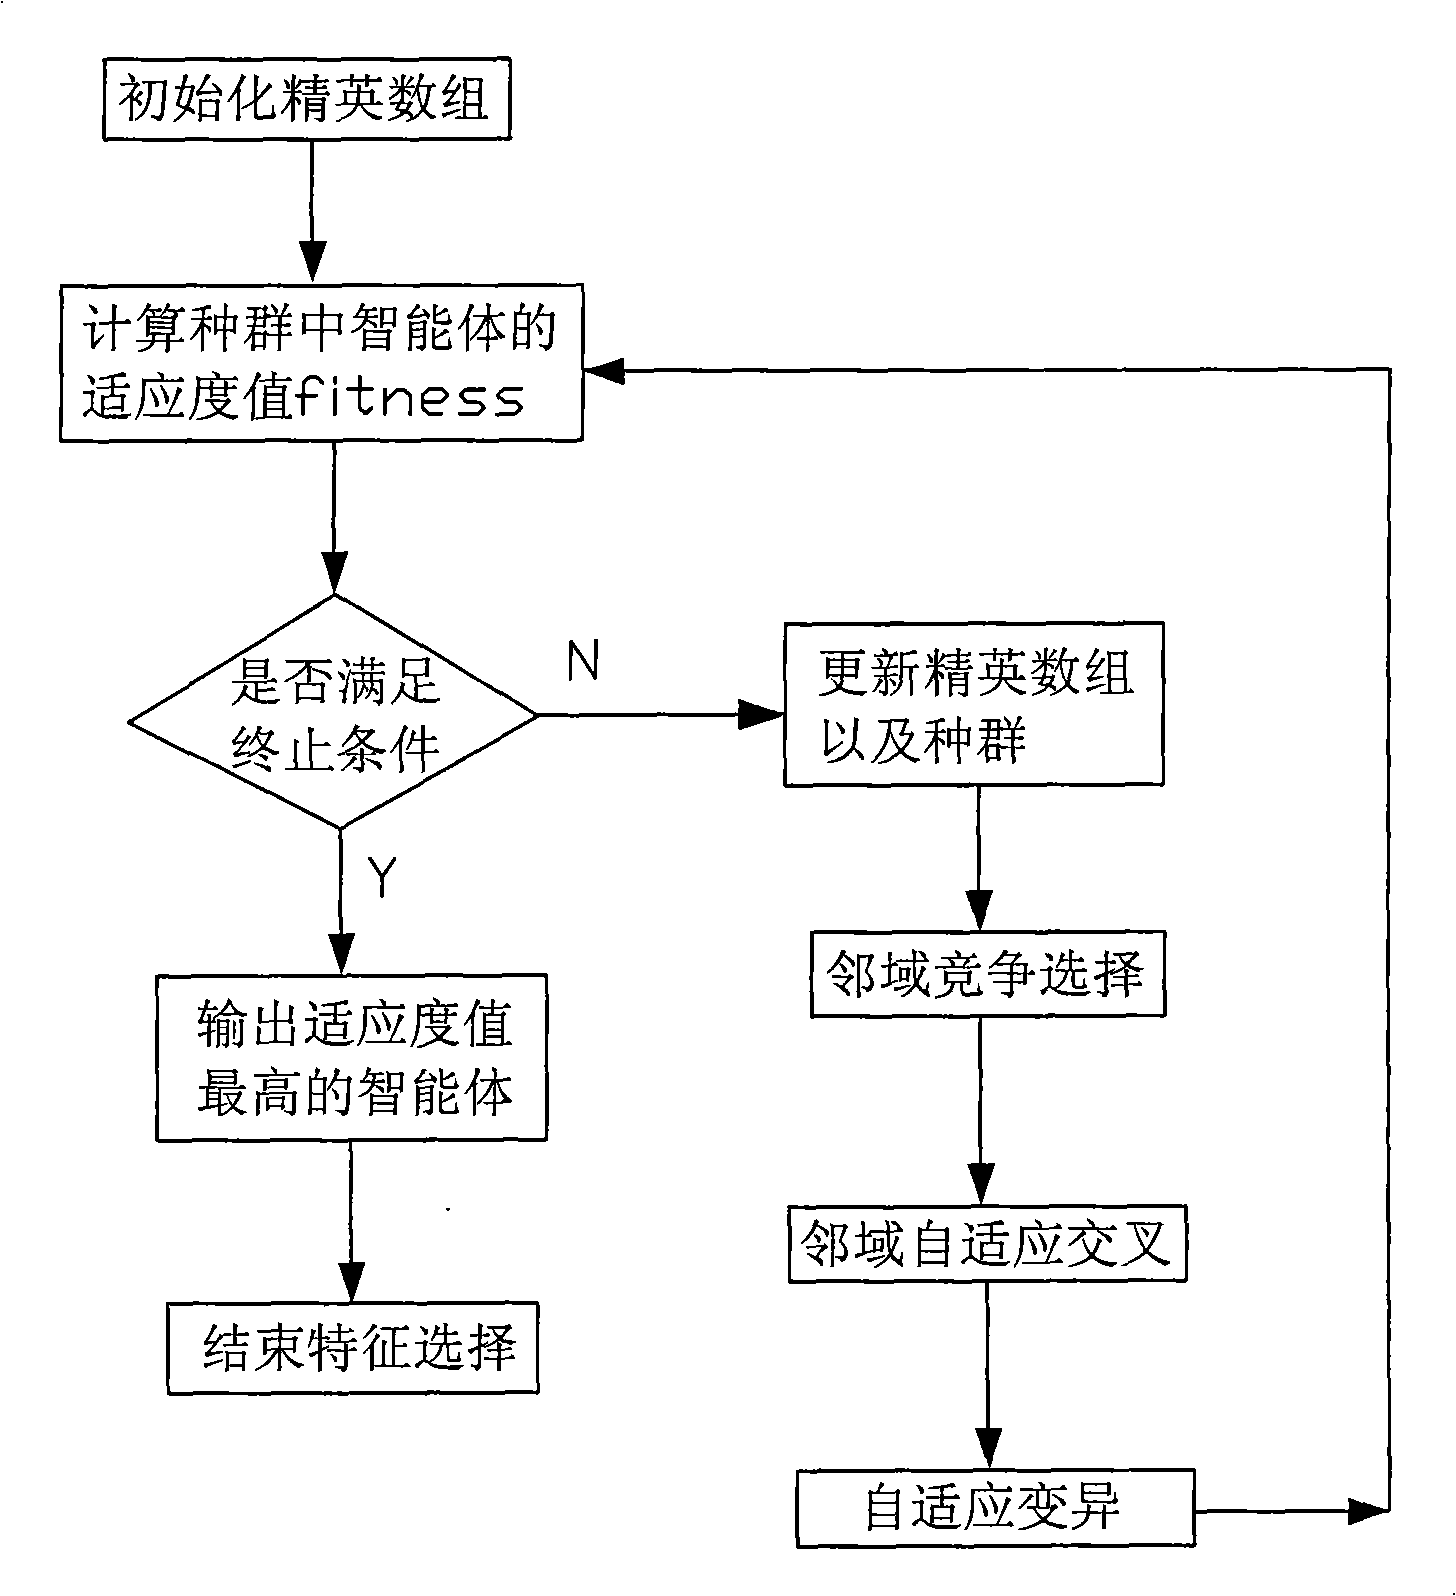 Method for selecting characteristic facing to complicated mode classification